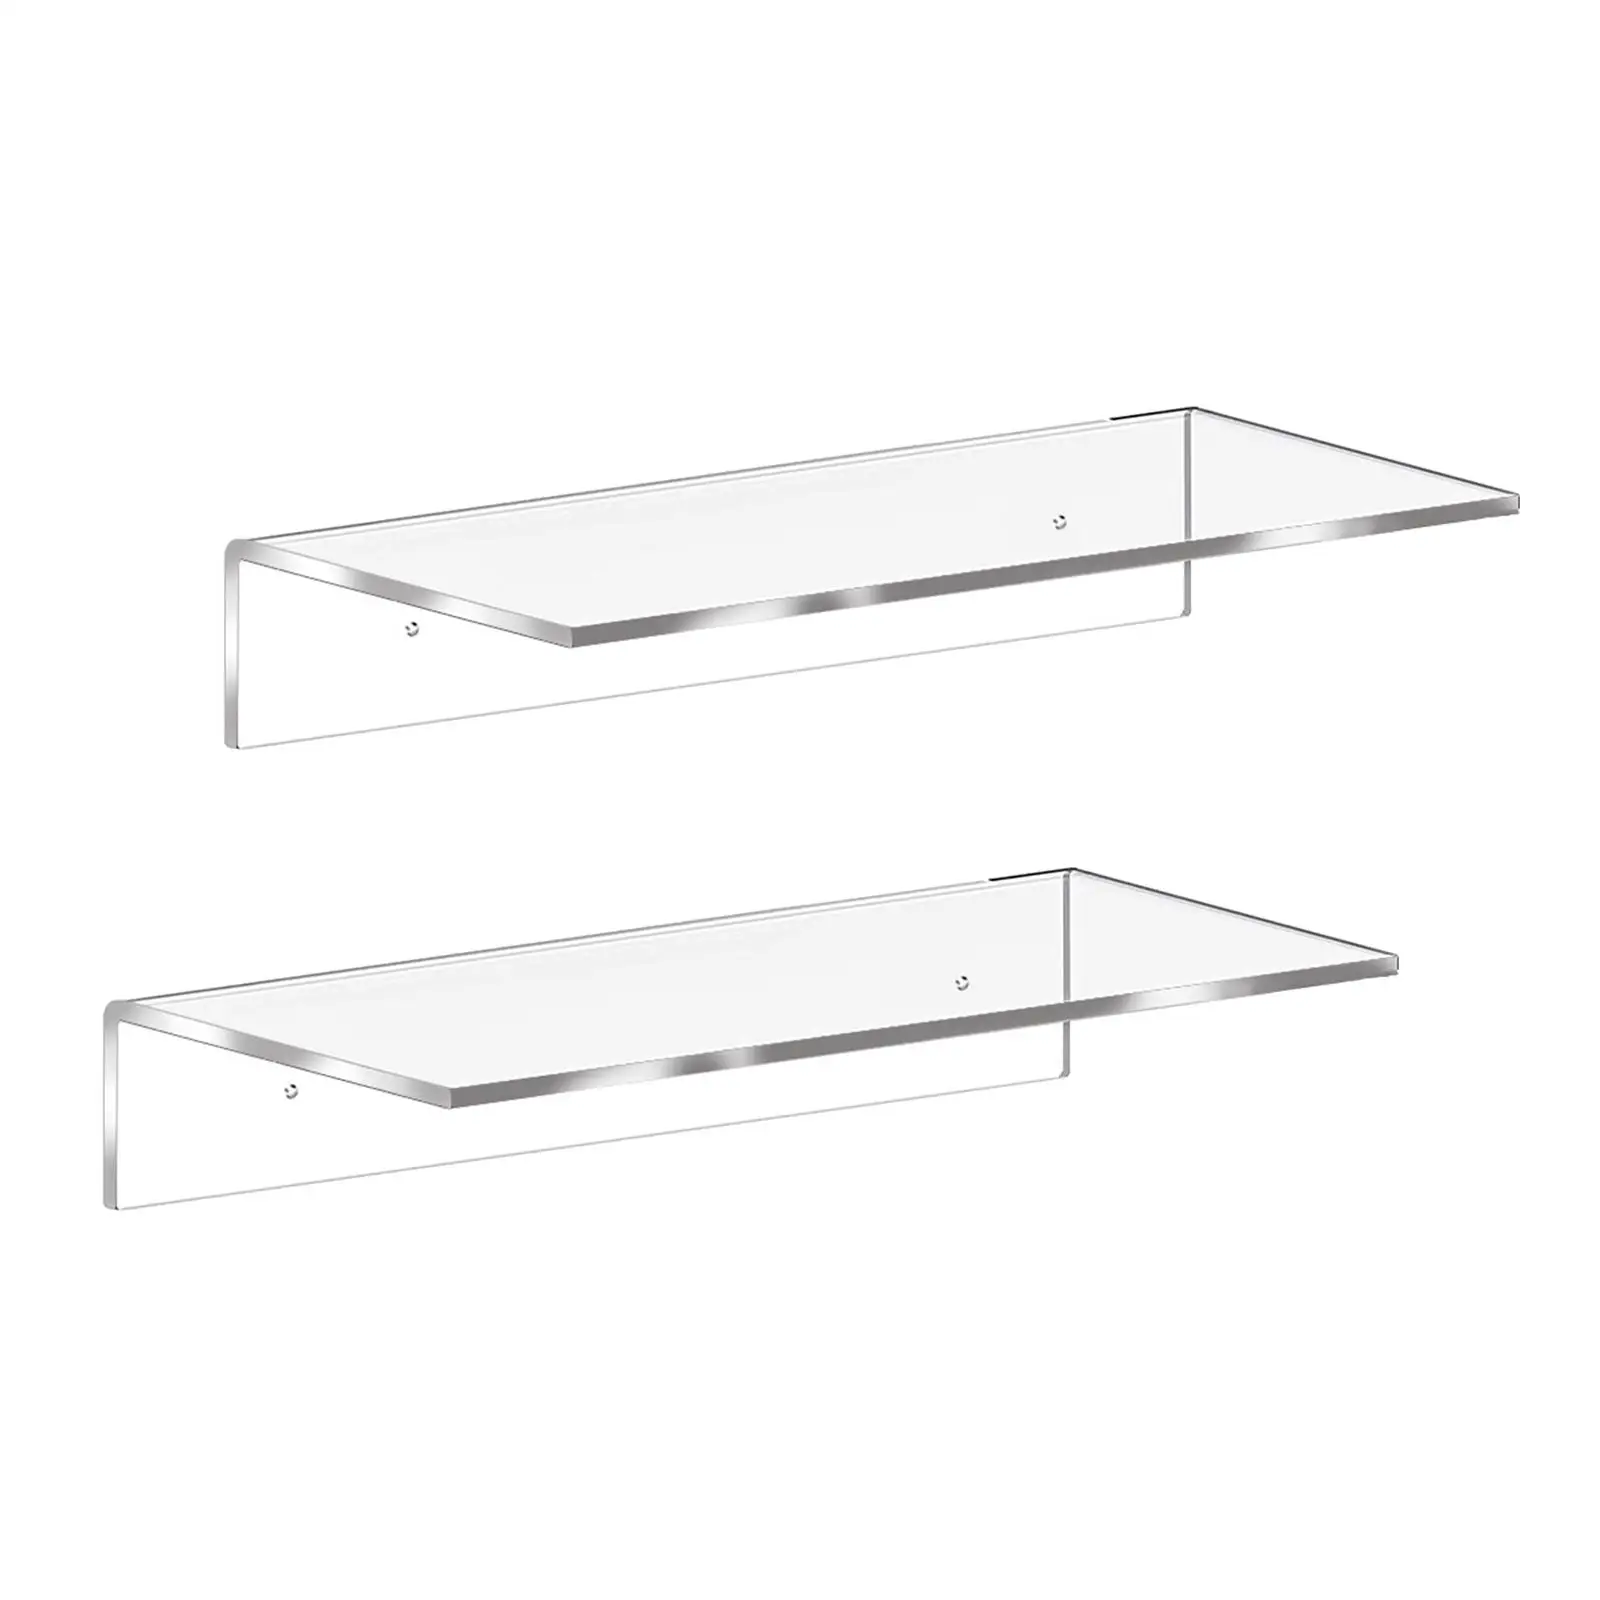 Acrylic Shelf Multipurpose Container Organization Accessories Floating Shelves for Kitchen